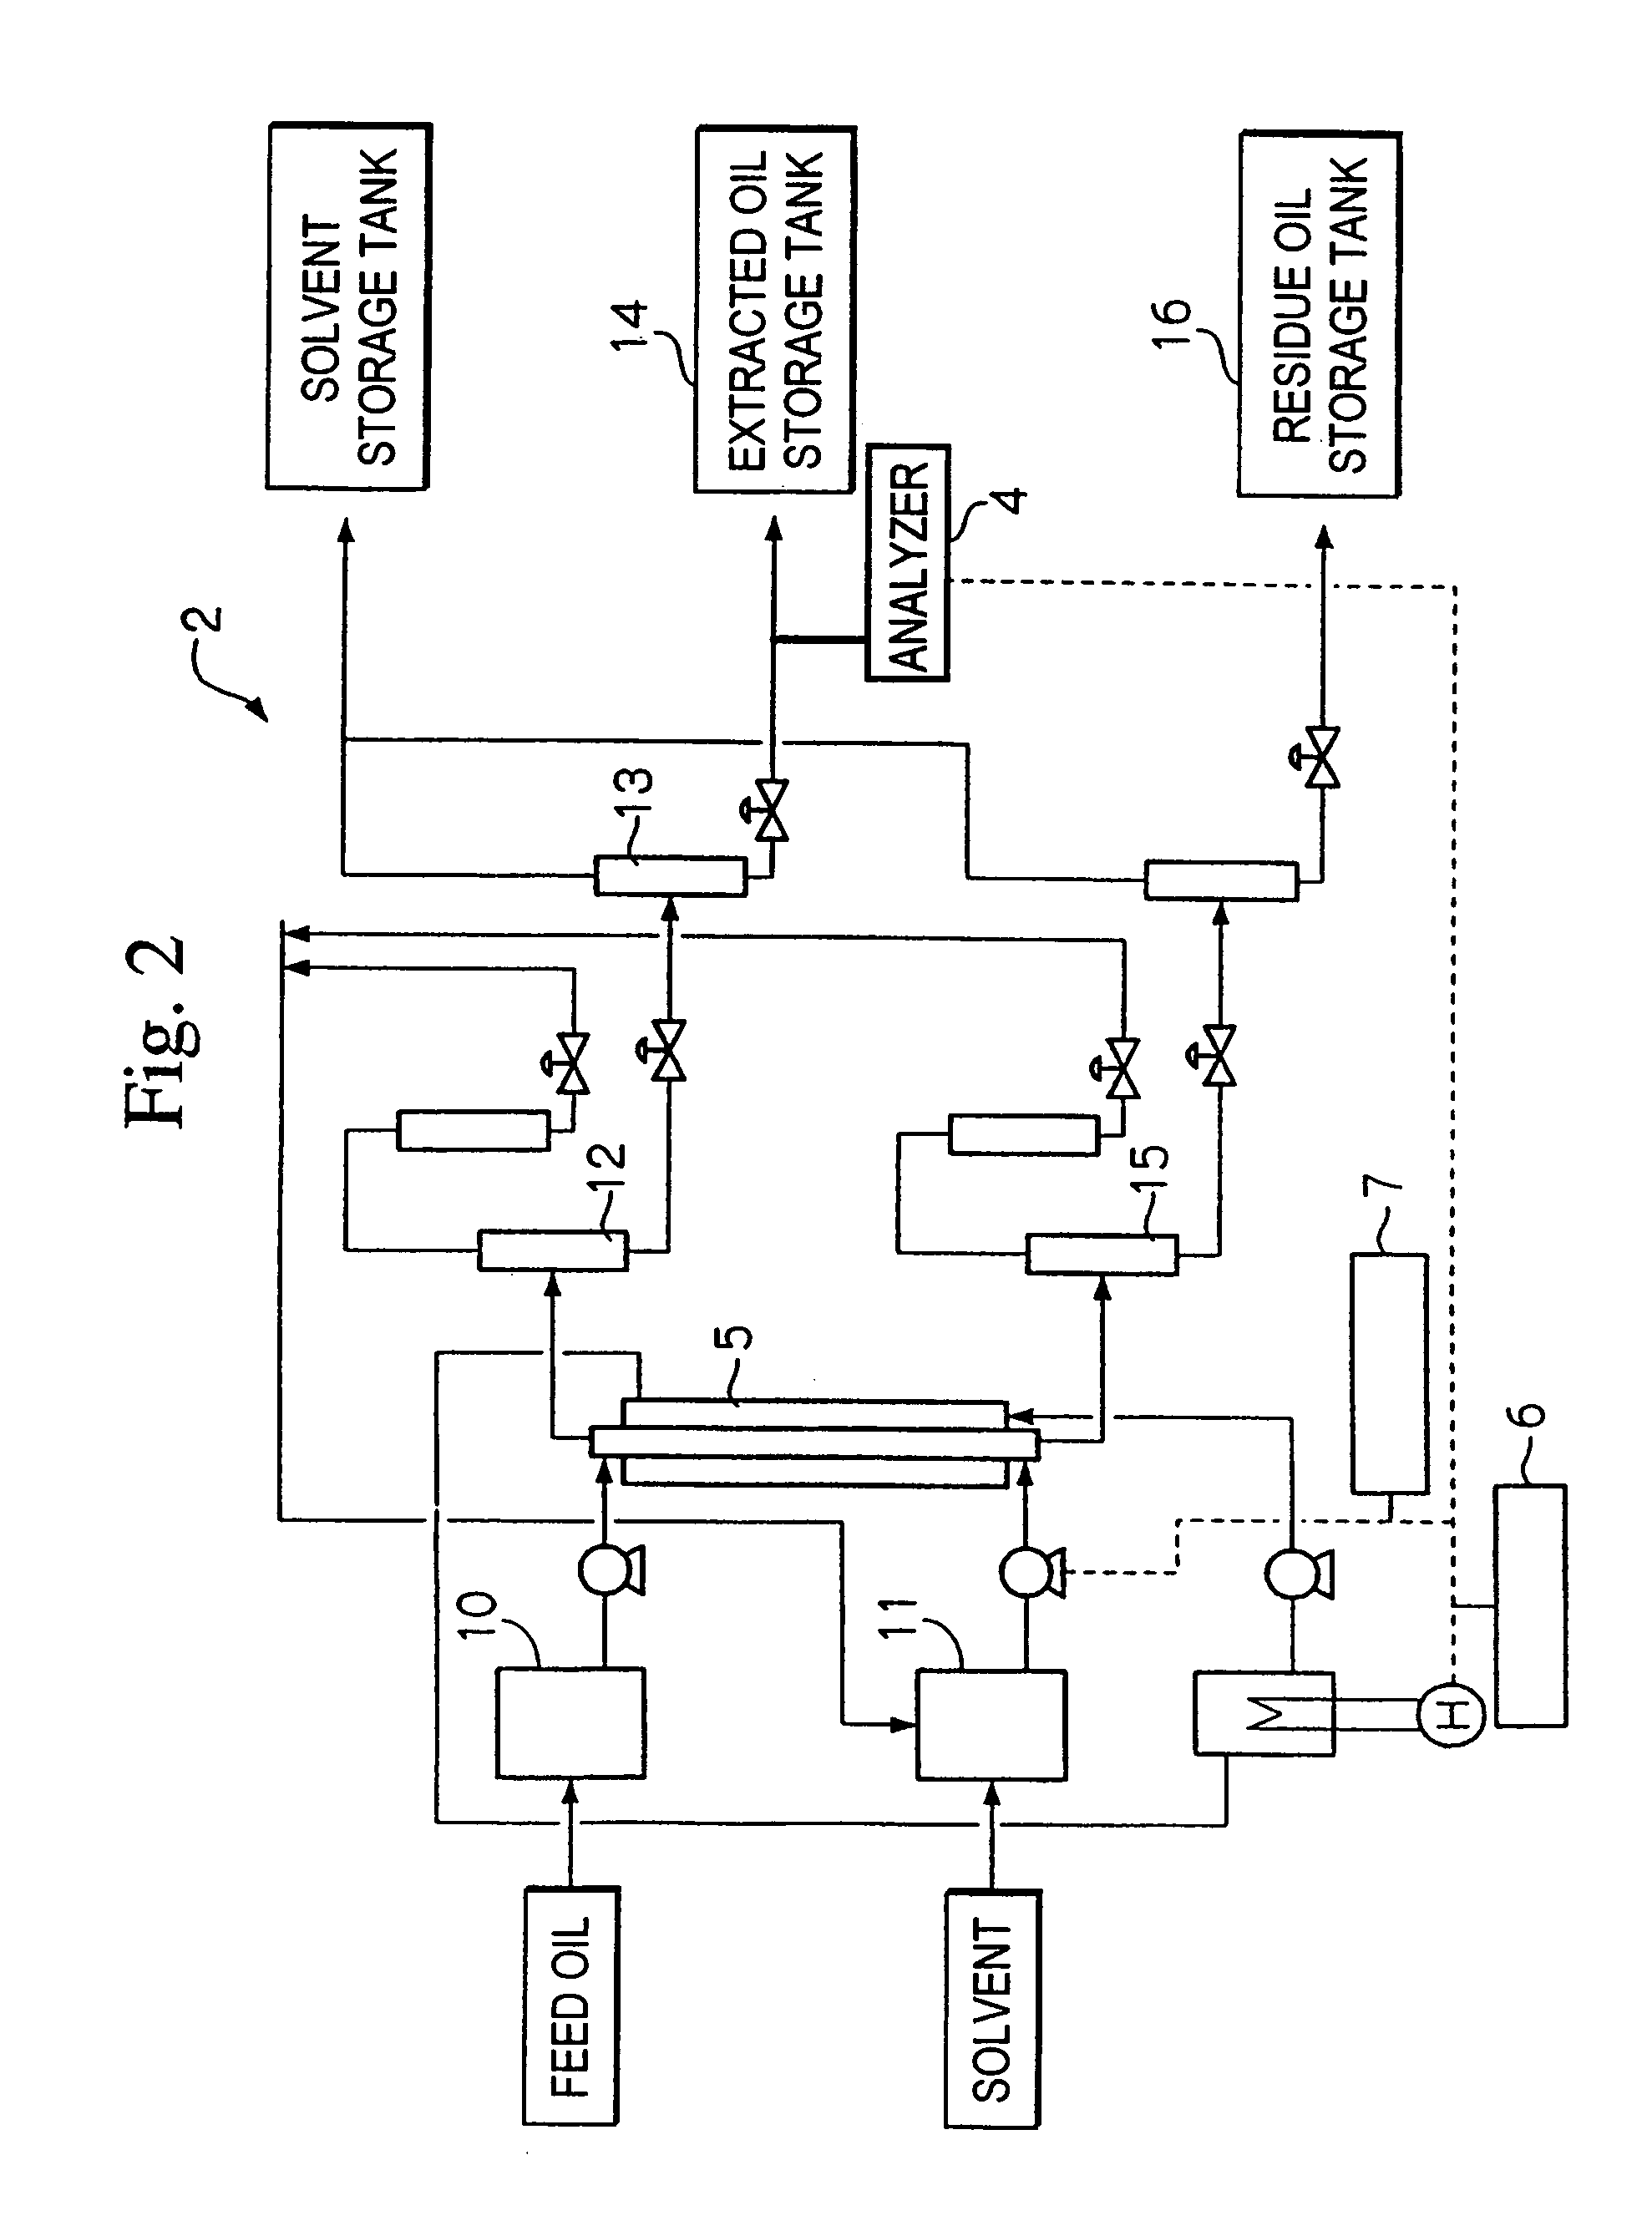 Method of refining heavy oil and refining apparatus